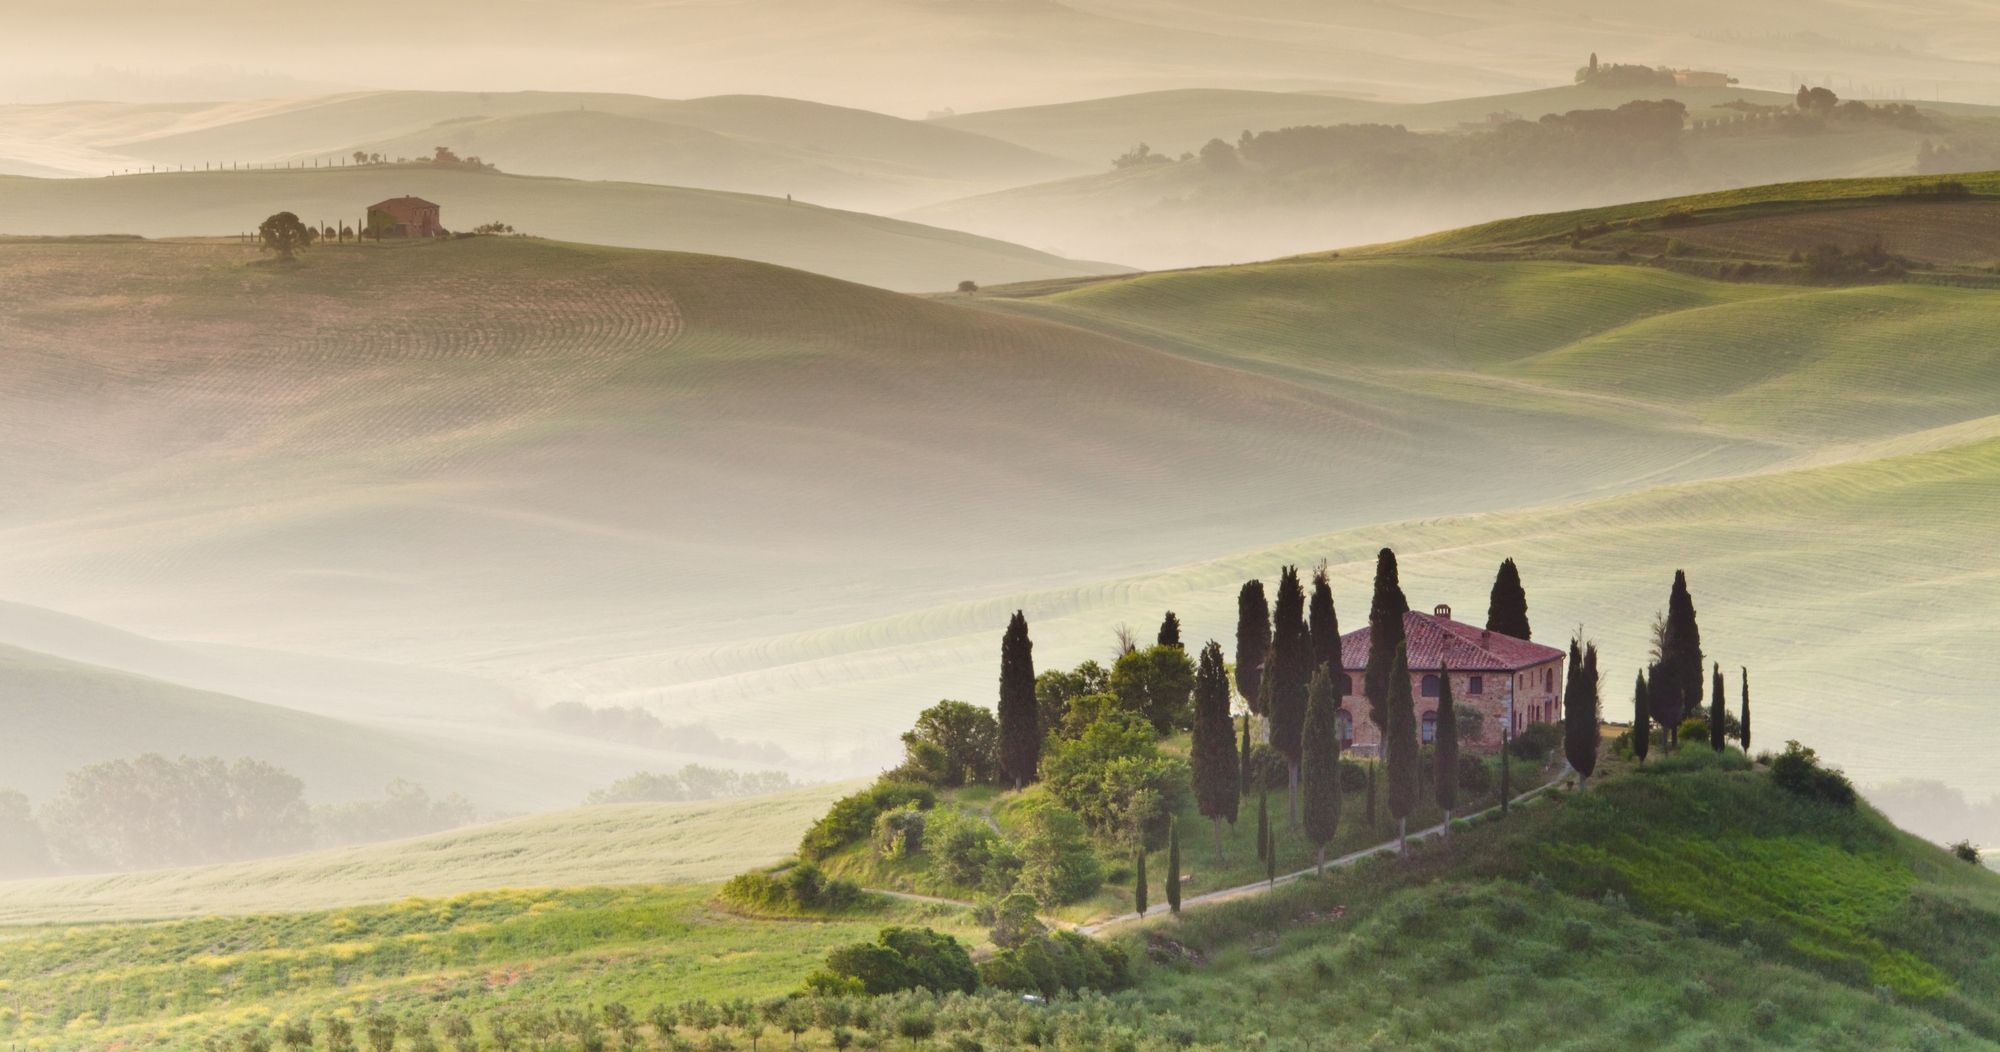 A view of vineyards in Toscana Italy under fog